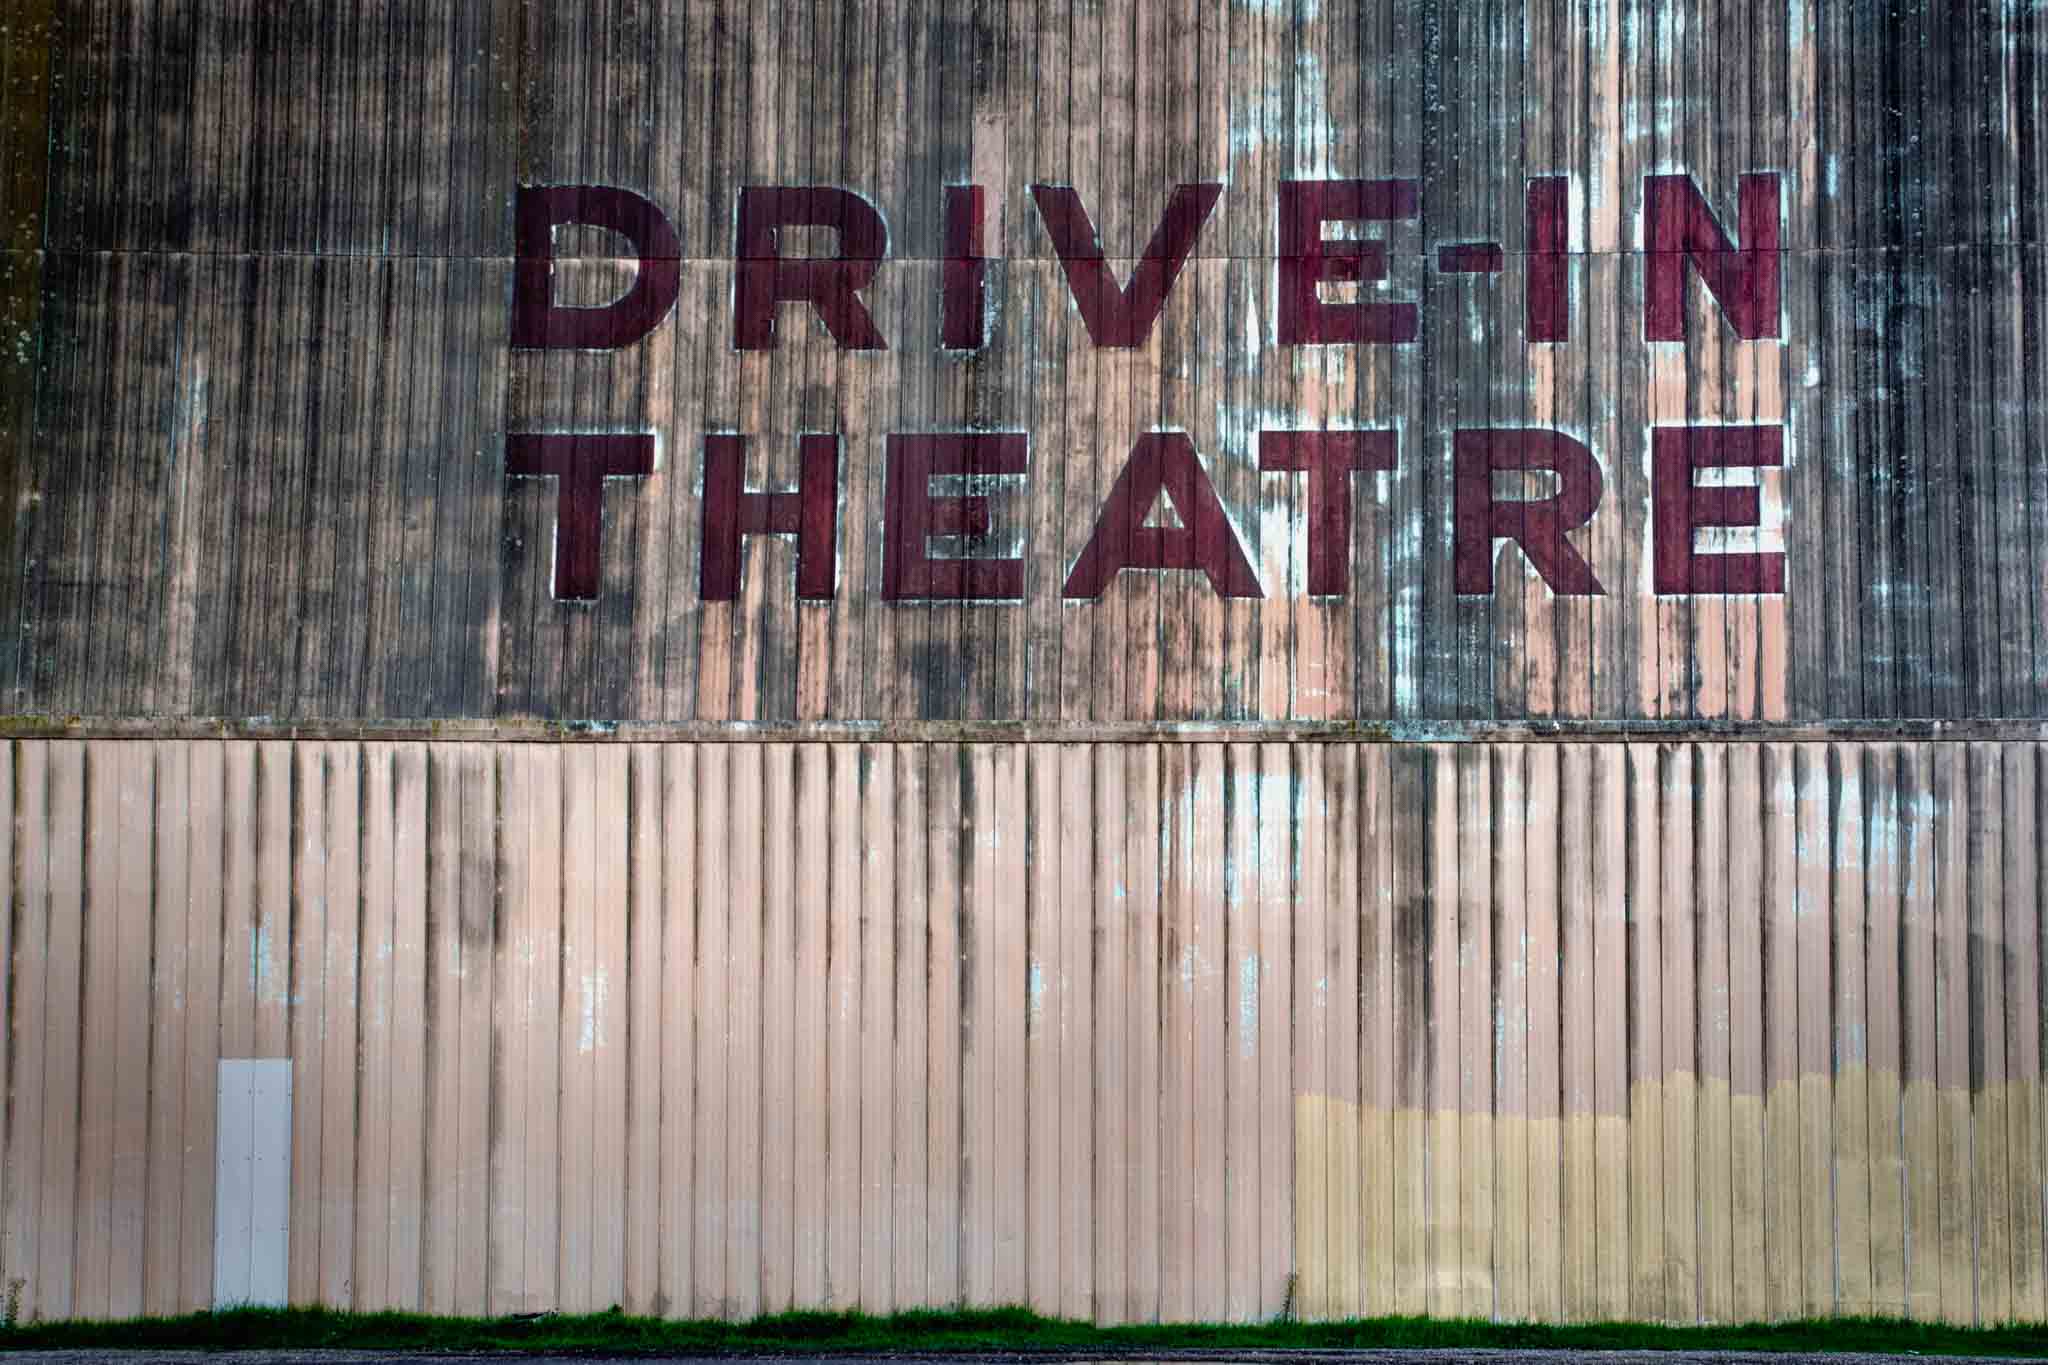 6 Great Drive in Movies still open in Minnesota to visit this summer.